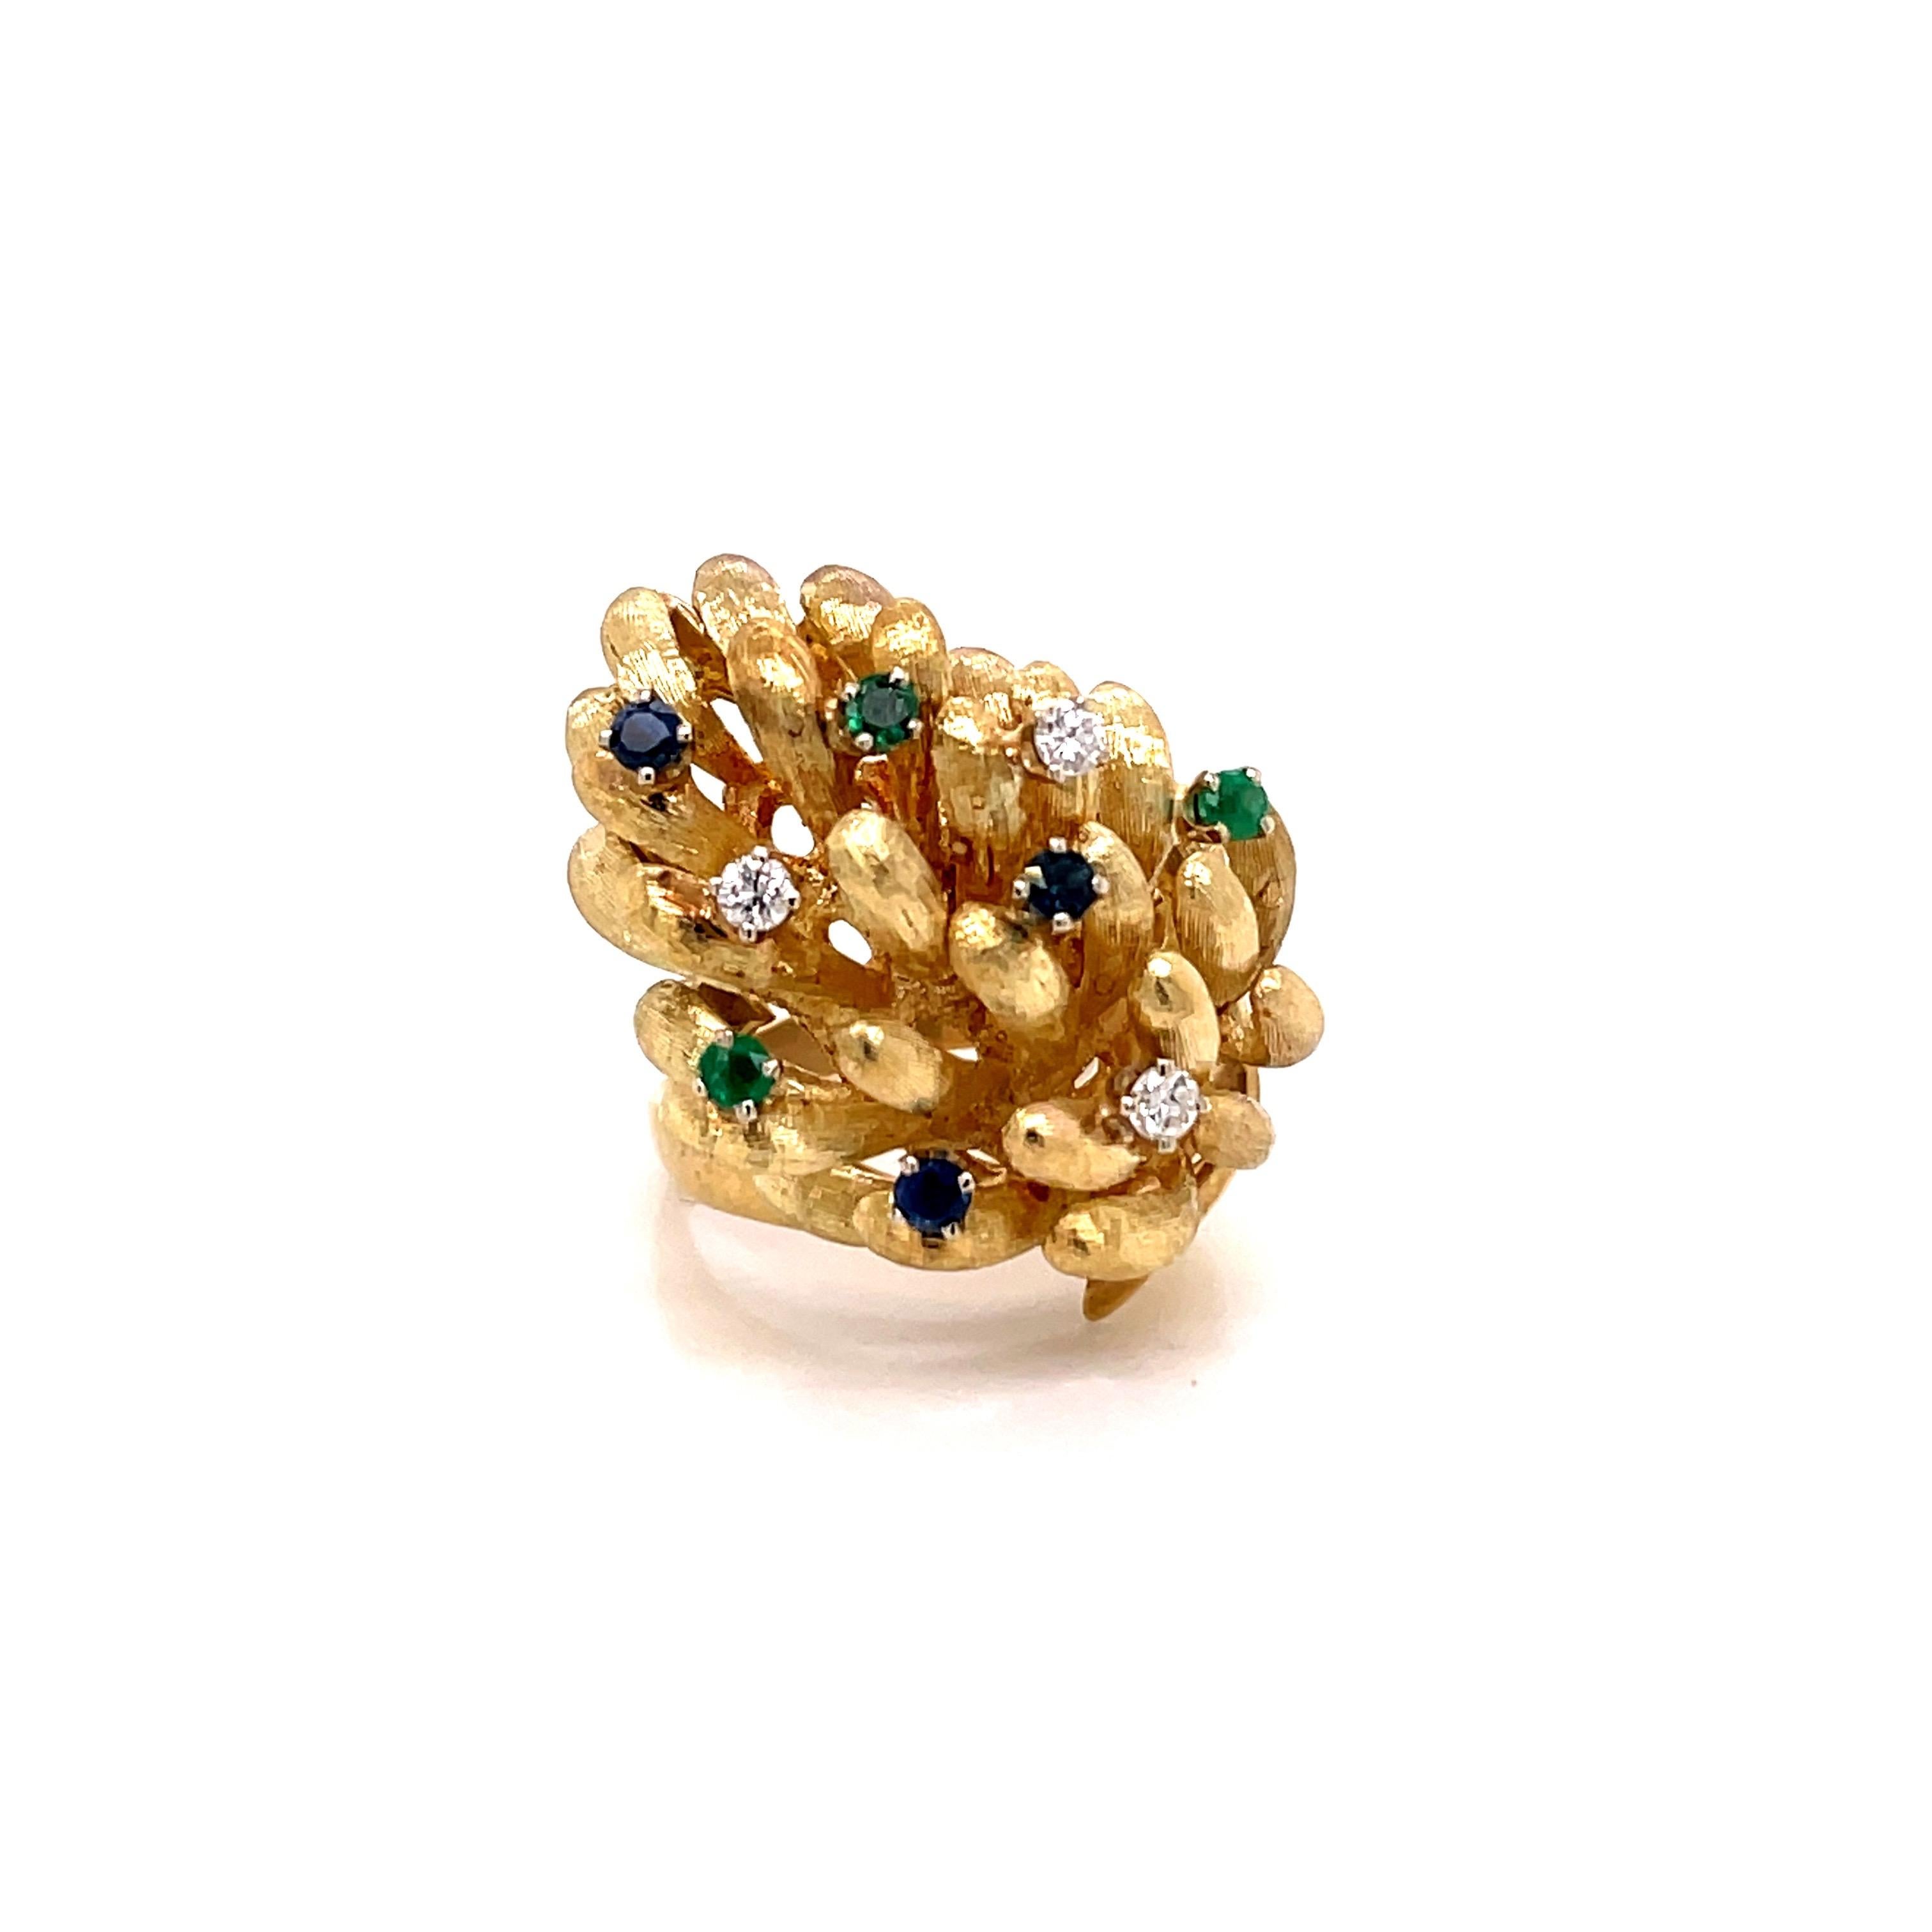 Vintage 14K Yellow Gold Grape Bunch Ring with Diamonds, Emeralds and Sapphires - The ring contains 3 round brilliant diamonds weighing approximately .15ct with G color and VS2 clarity. The 3 round sapphires and 3 round emeralds have very fine color